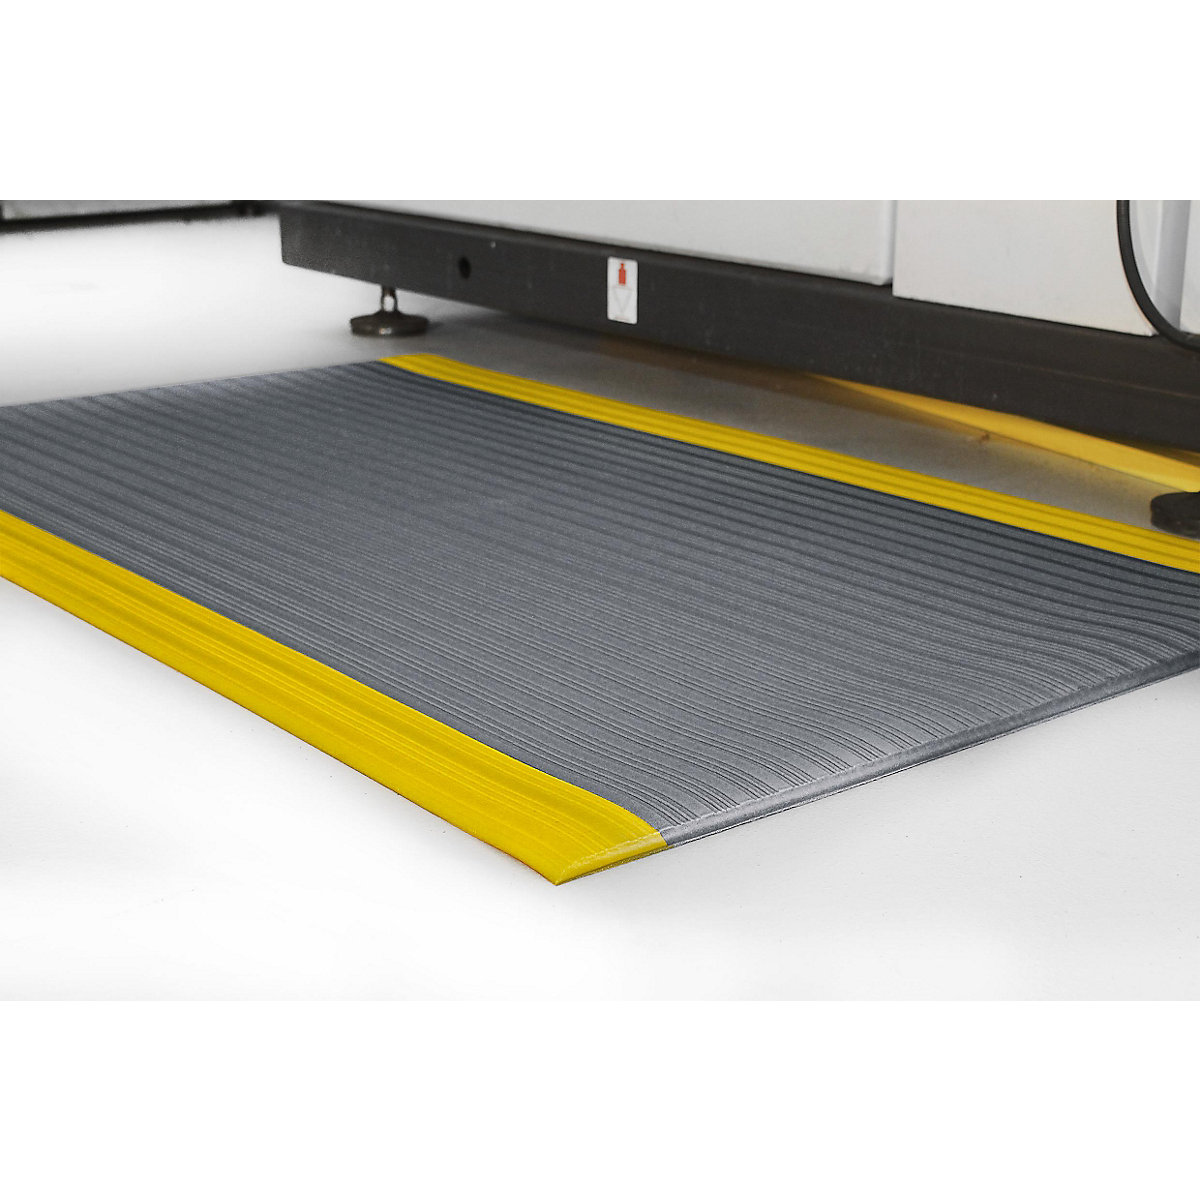 Orthomat® Ribbed anti-fatigue matting – COBA, width 910 mm, per m, grey with high visibility stripes